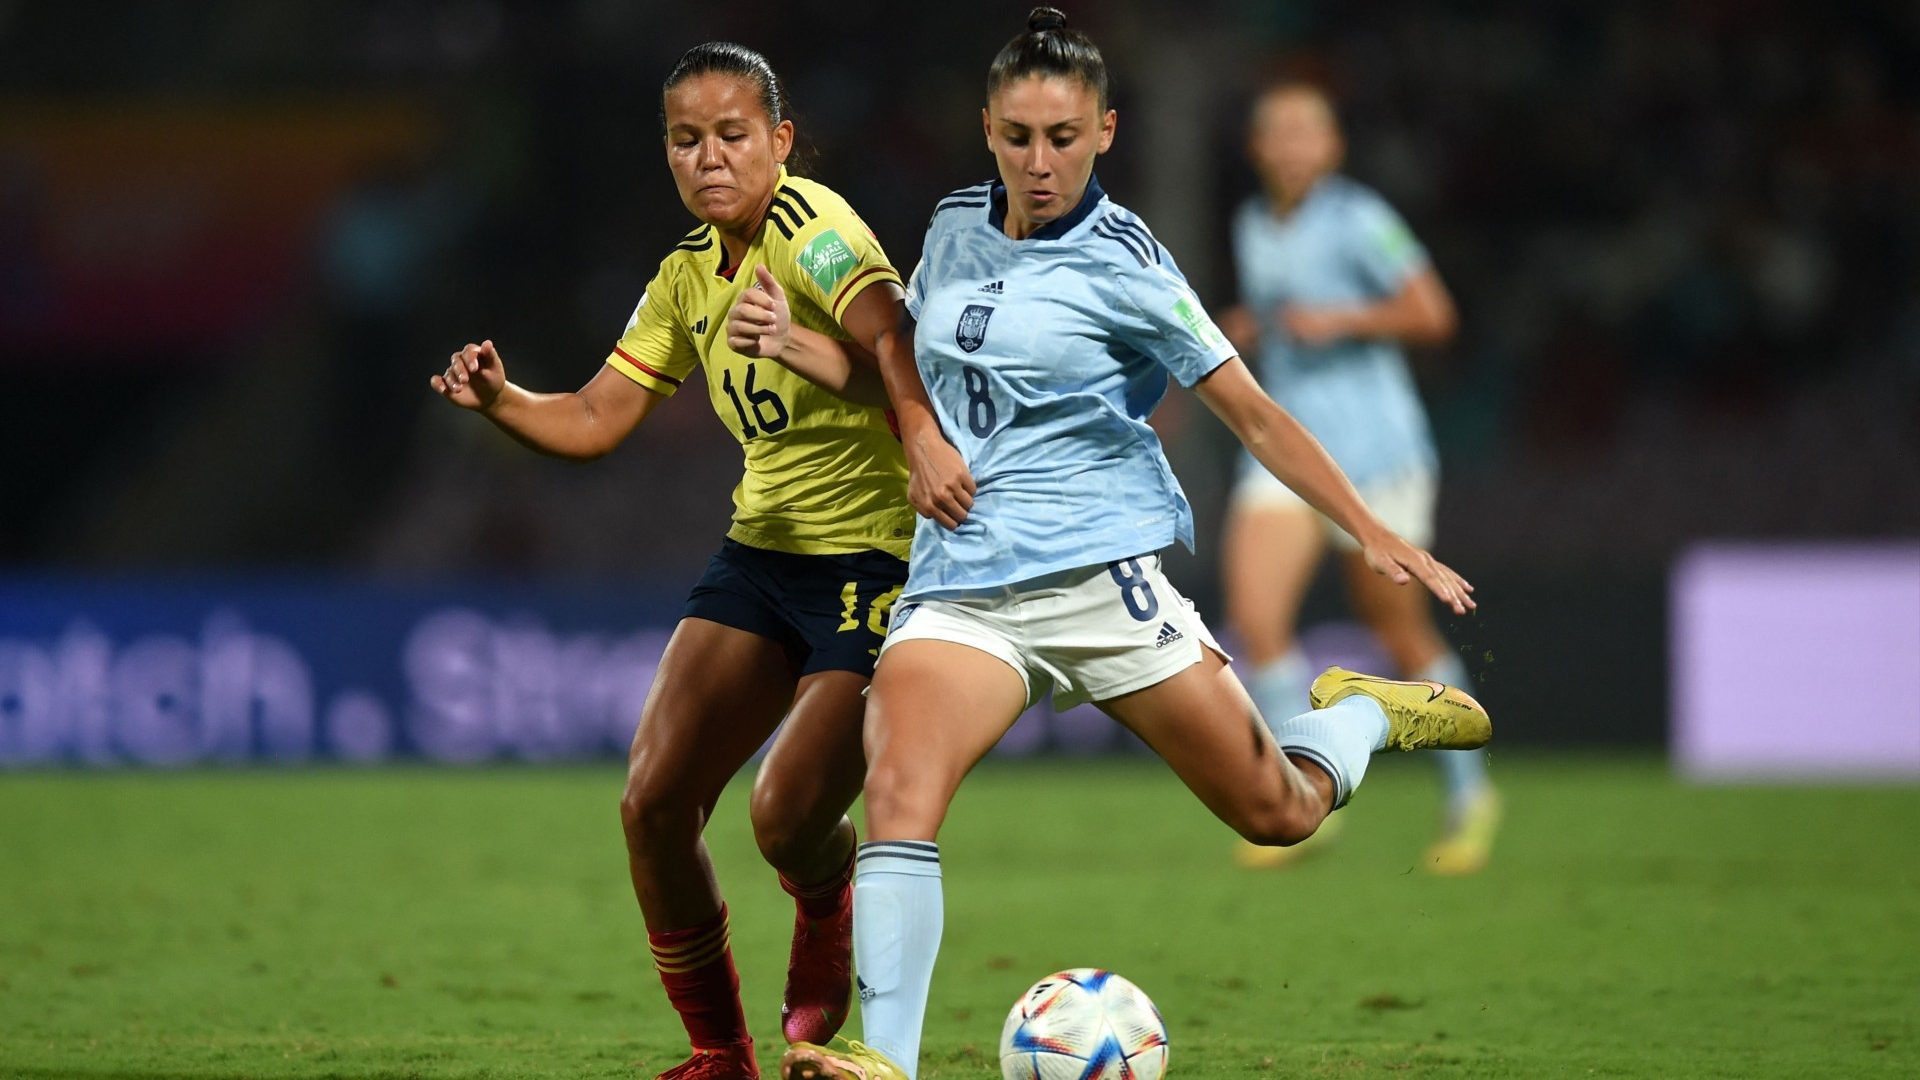 The Women's Soccer World Cup and FIFA's little interest